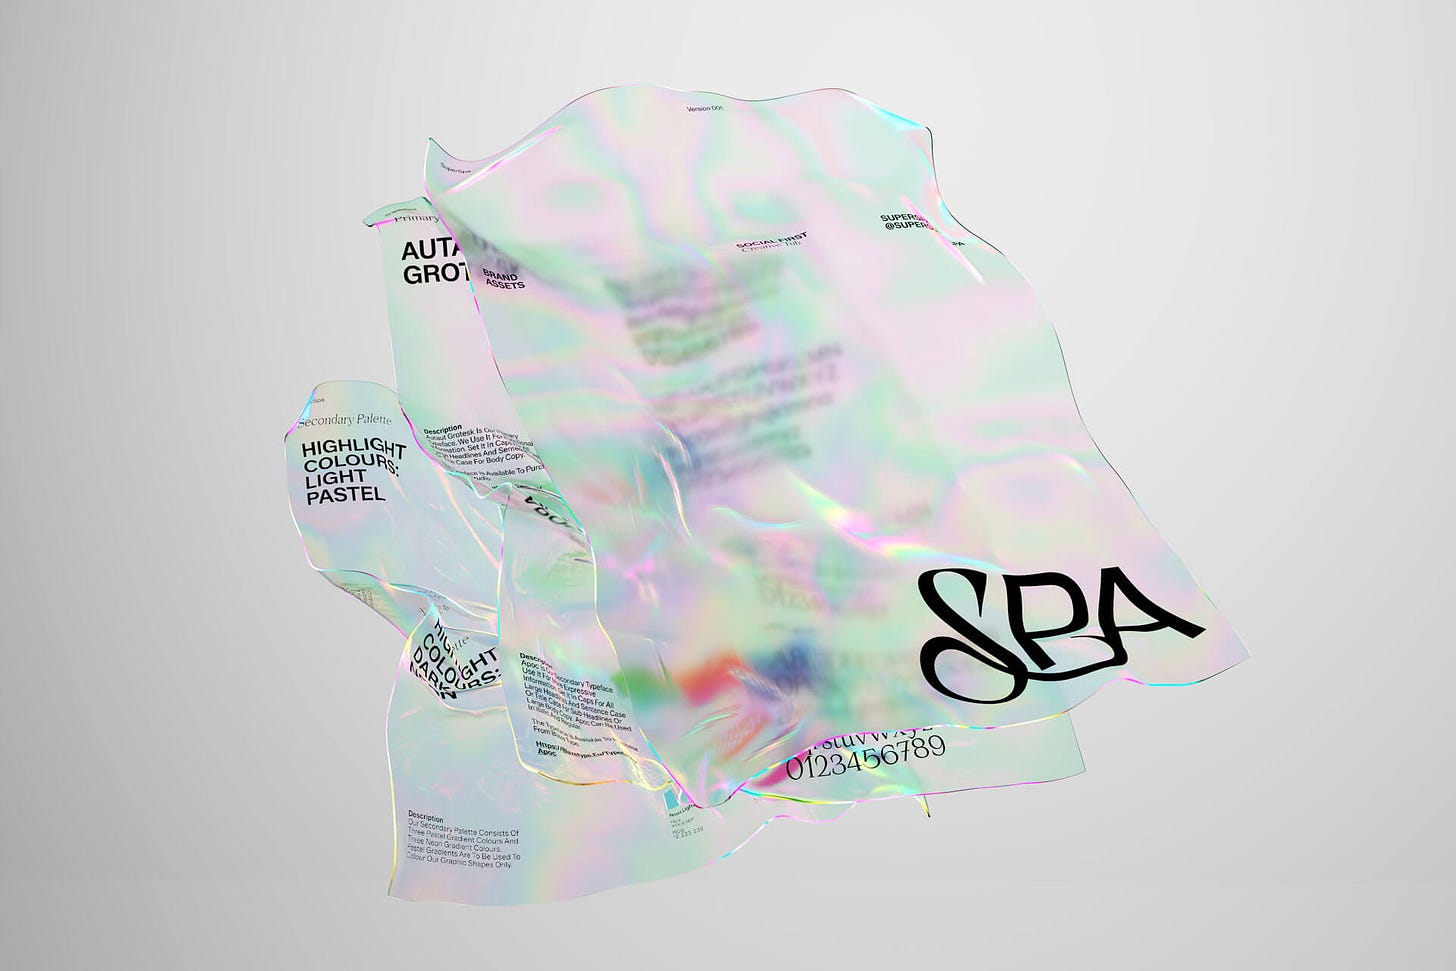 Sheets of Super Spa graphic assets in transparent iridescent finish floating in mid air.